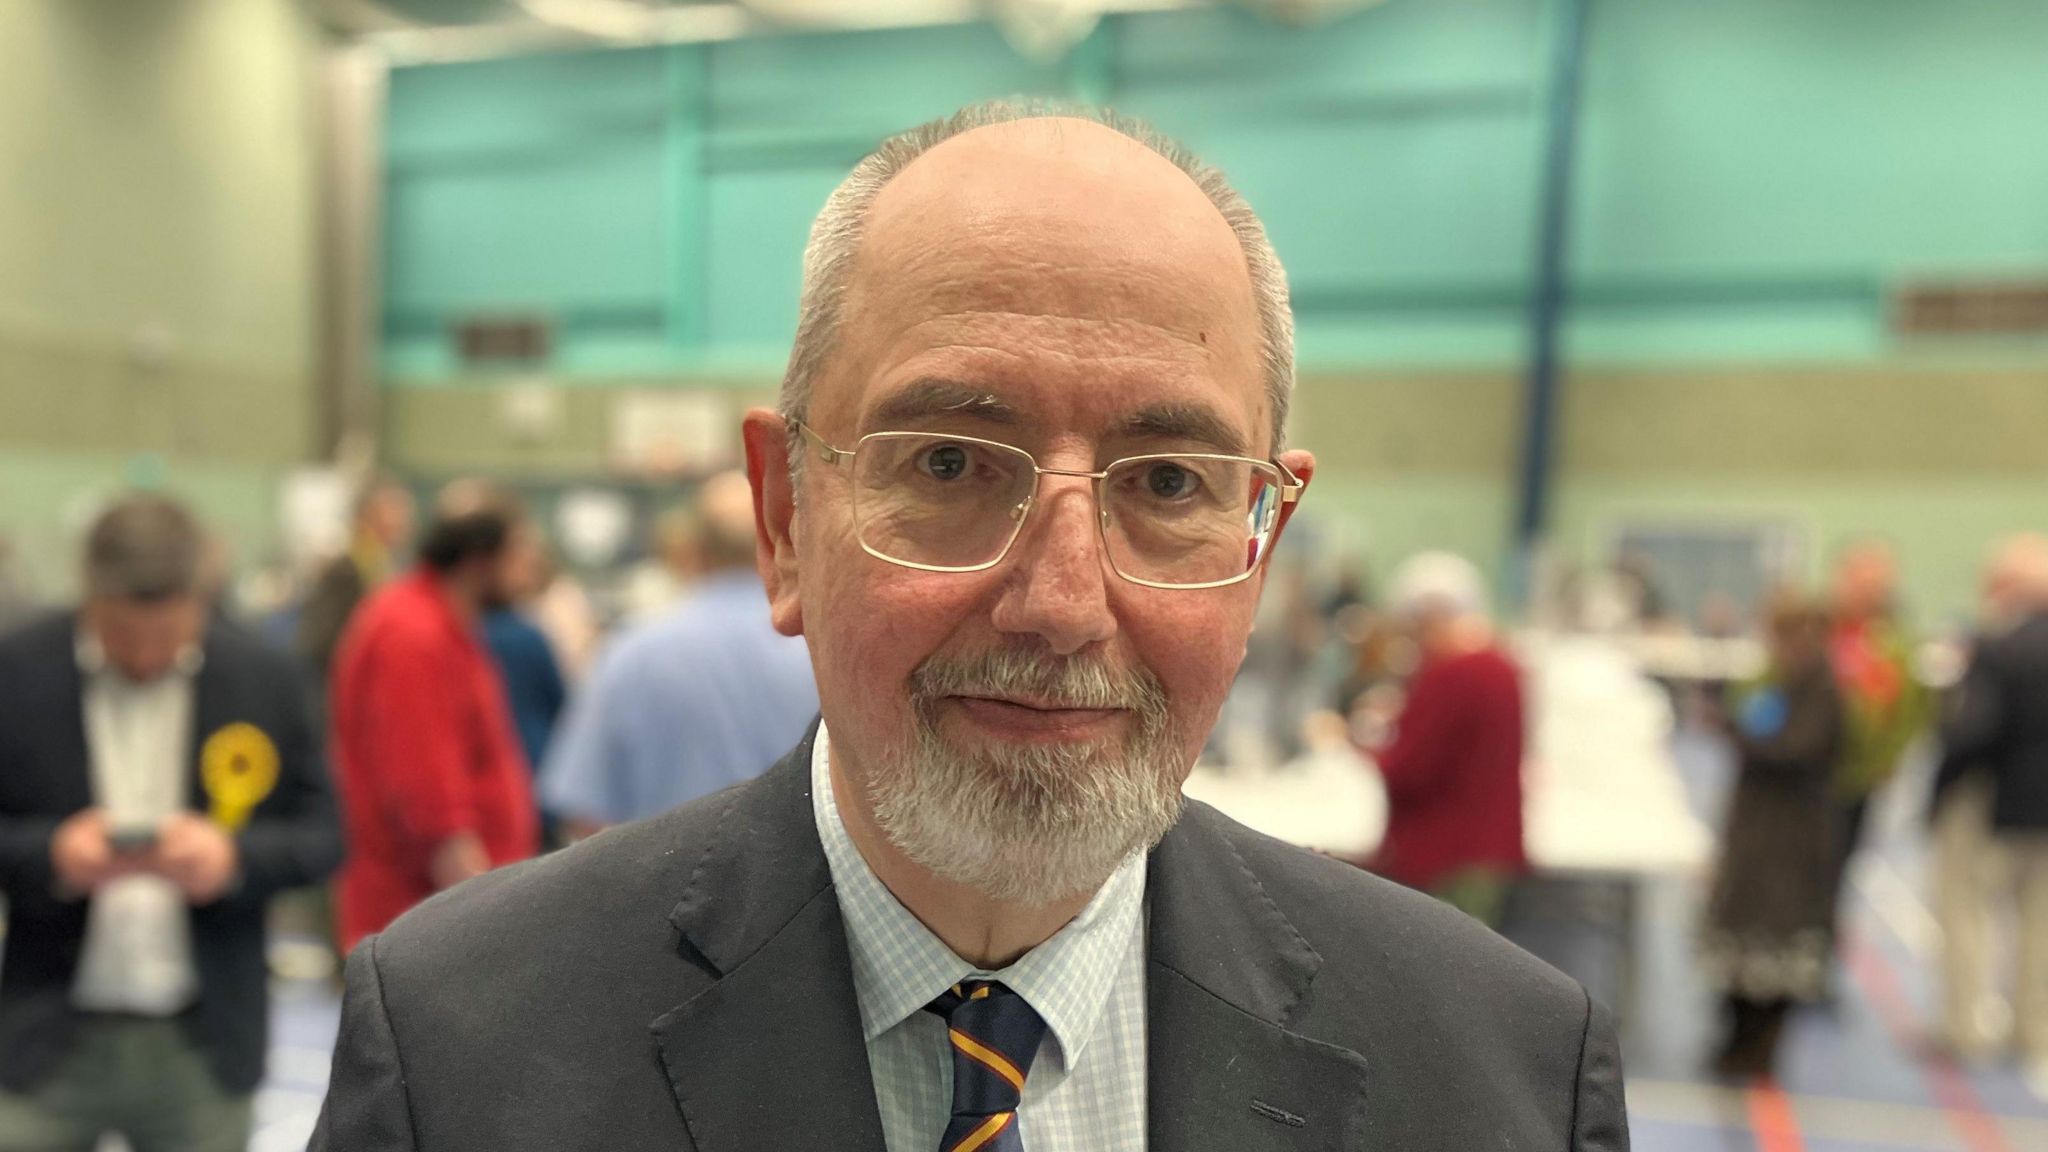 A bald man with glasses and a short grey beard, wearing a suit and tie photographed from the torso up. A sportshall is out of focus in the background.